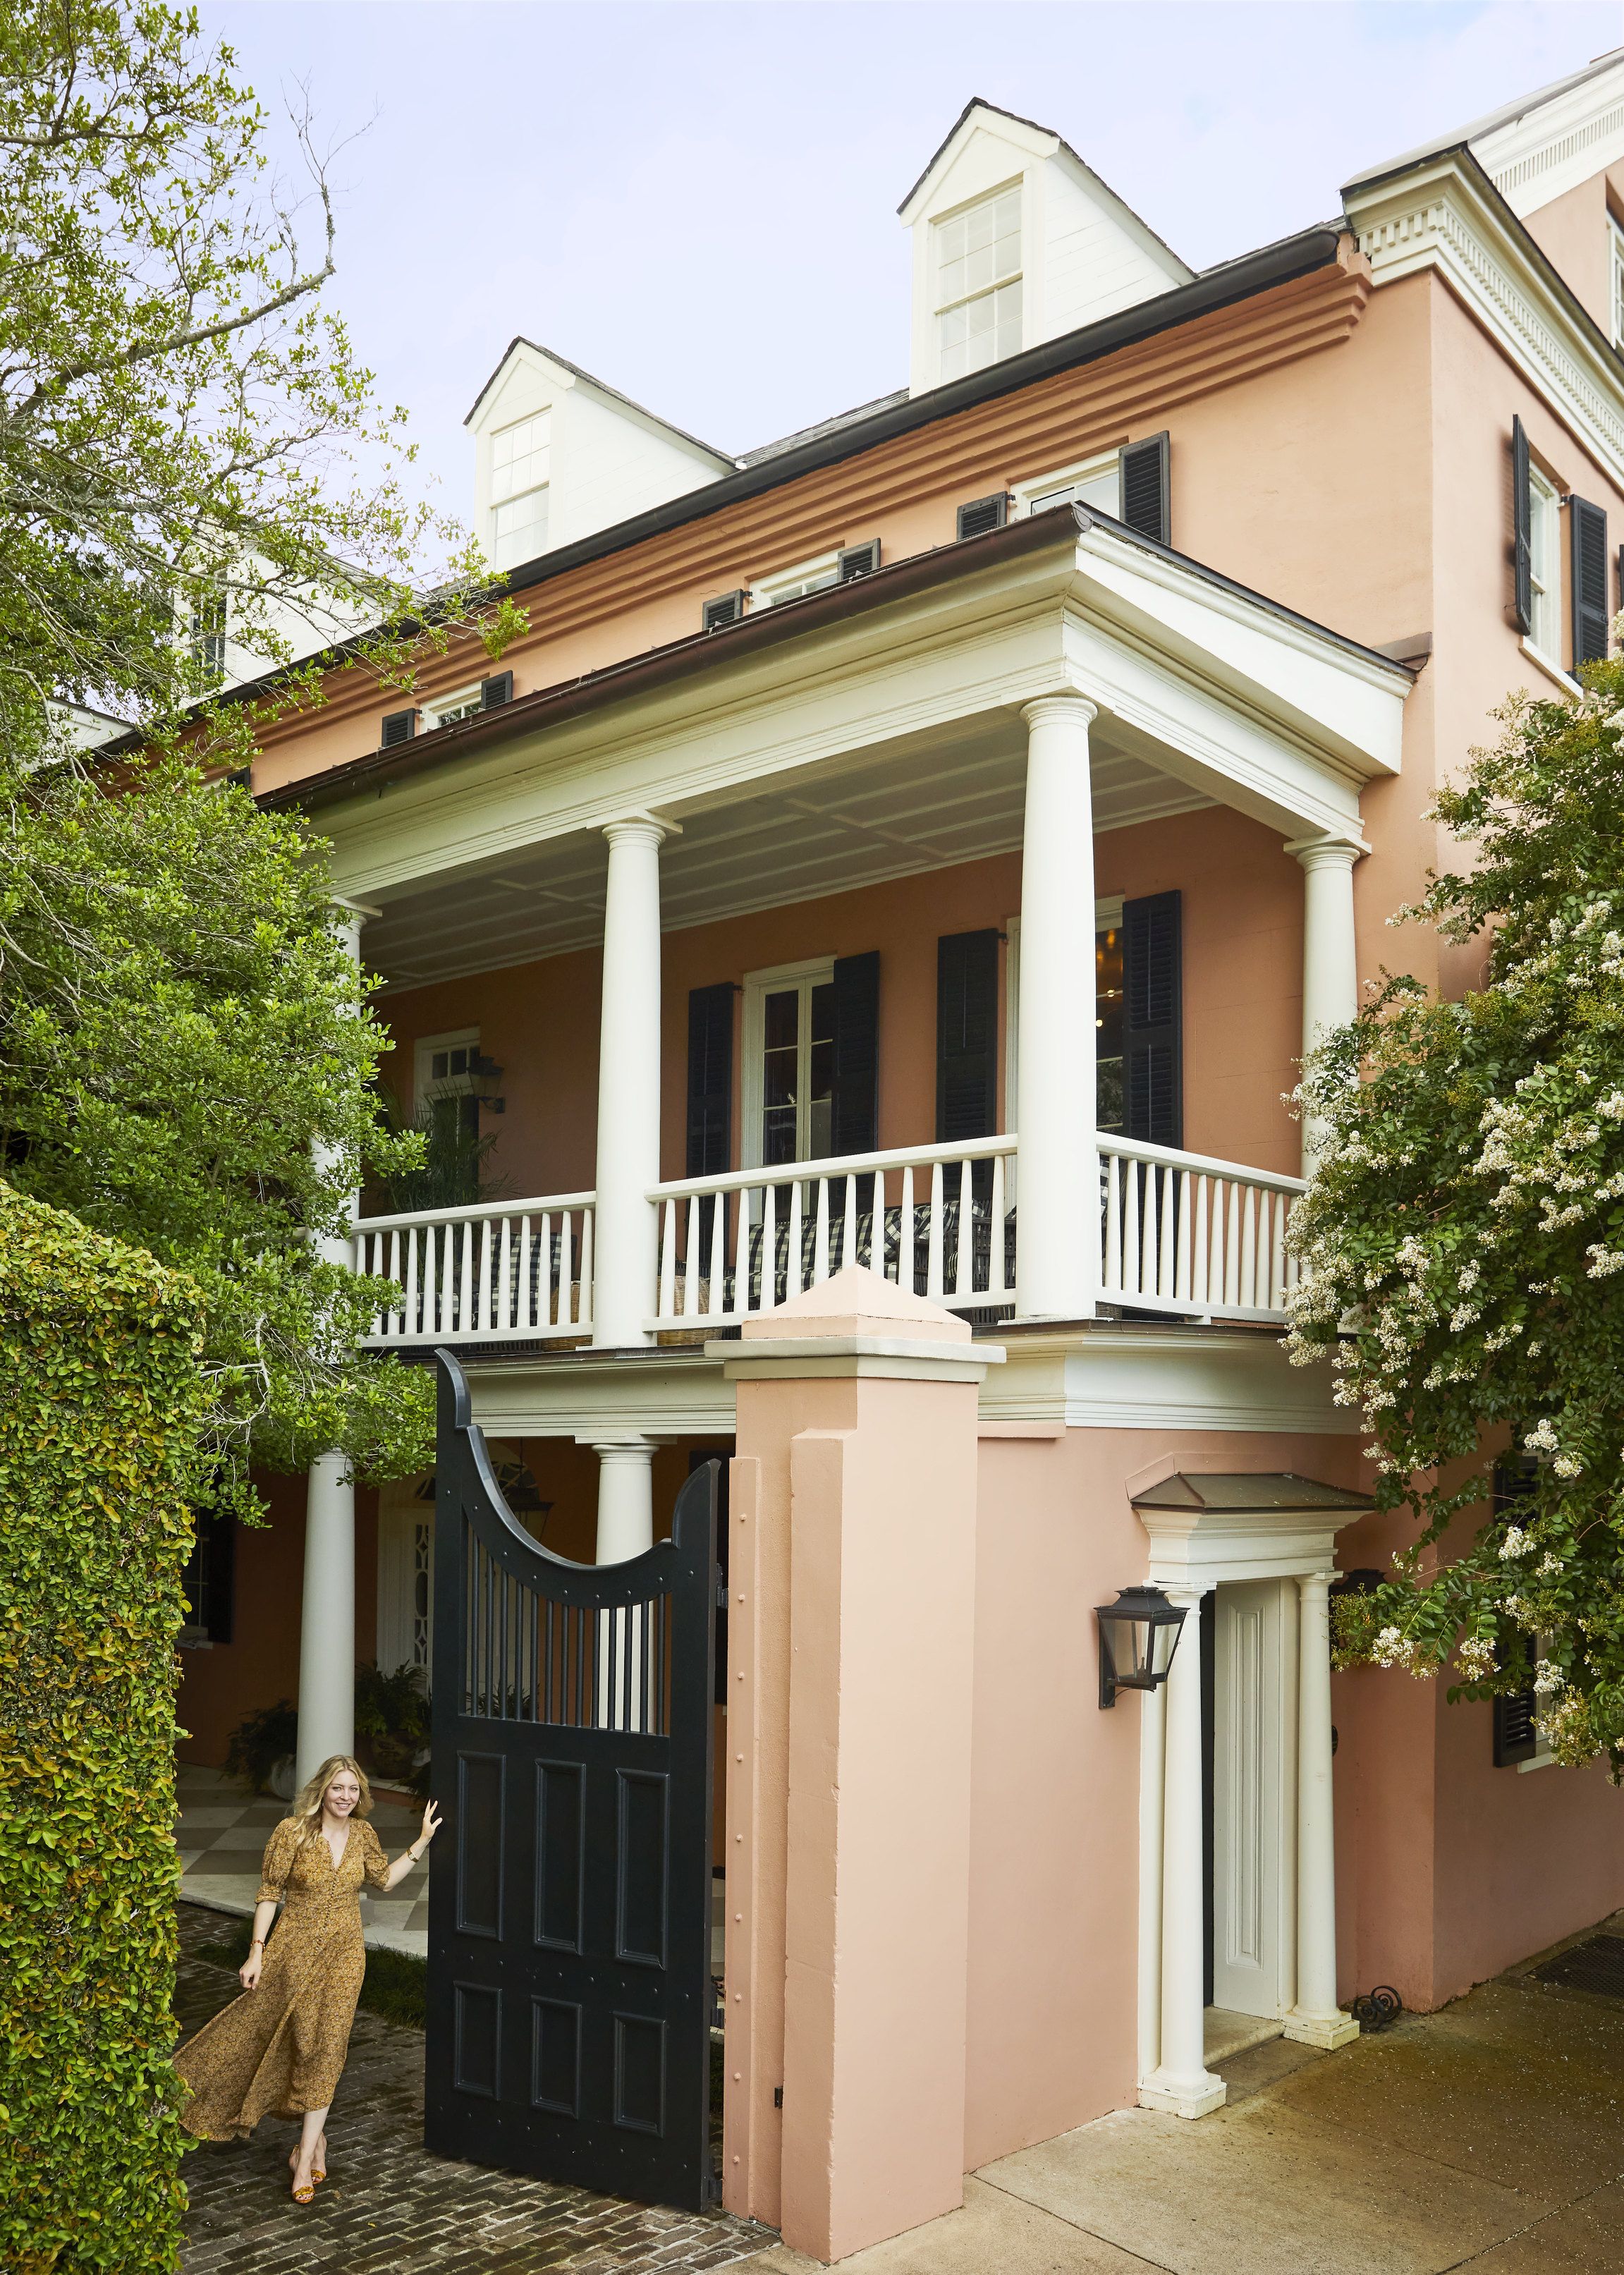 a three story peachy colored house with white columns and black shutters and gate